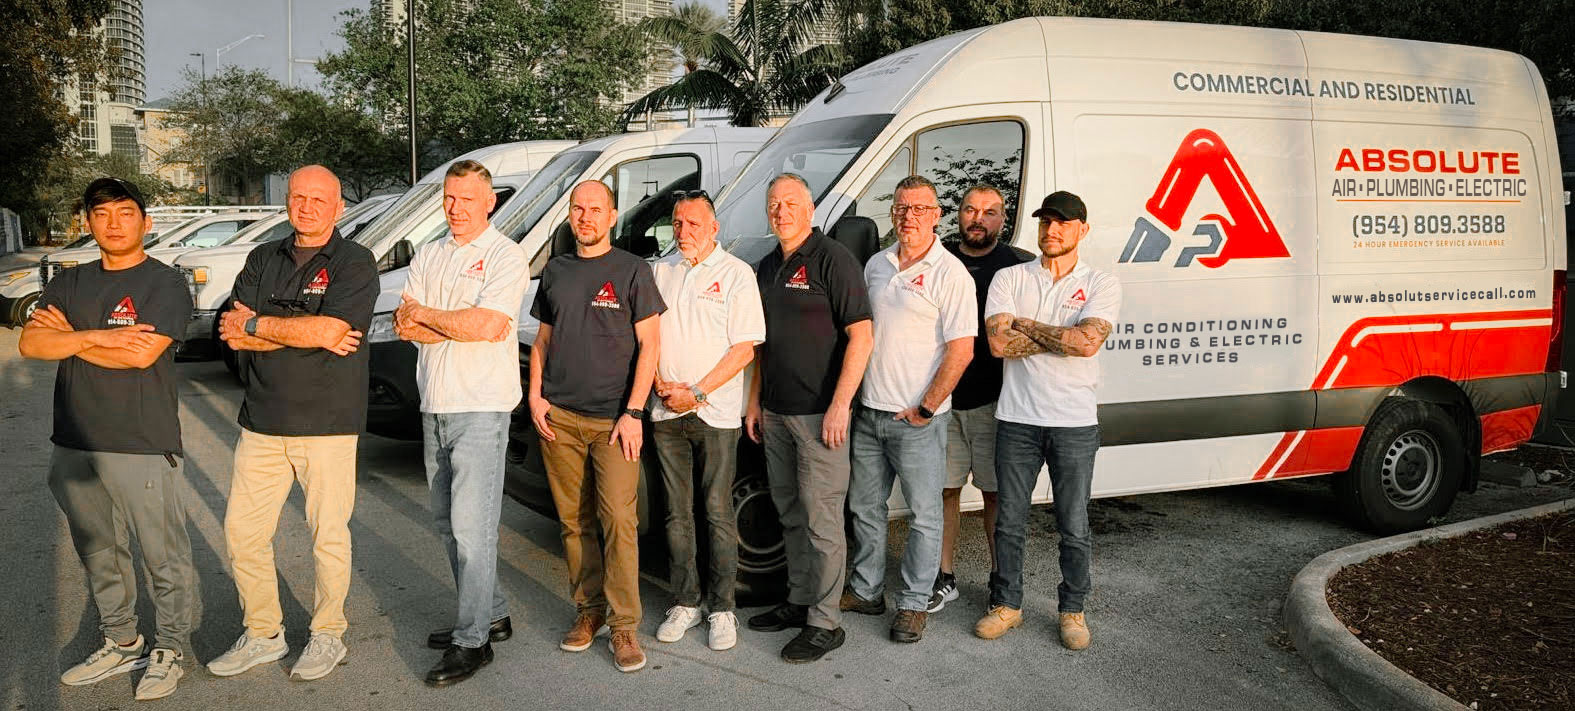 AIR CONDITIONING PLUMBING & ELECTRIC SERVICES TEAM